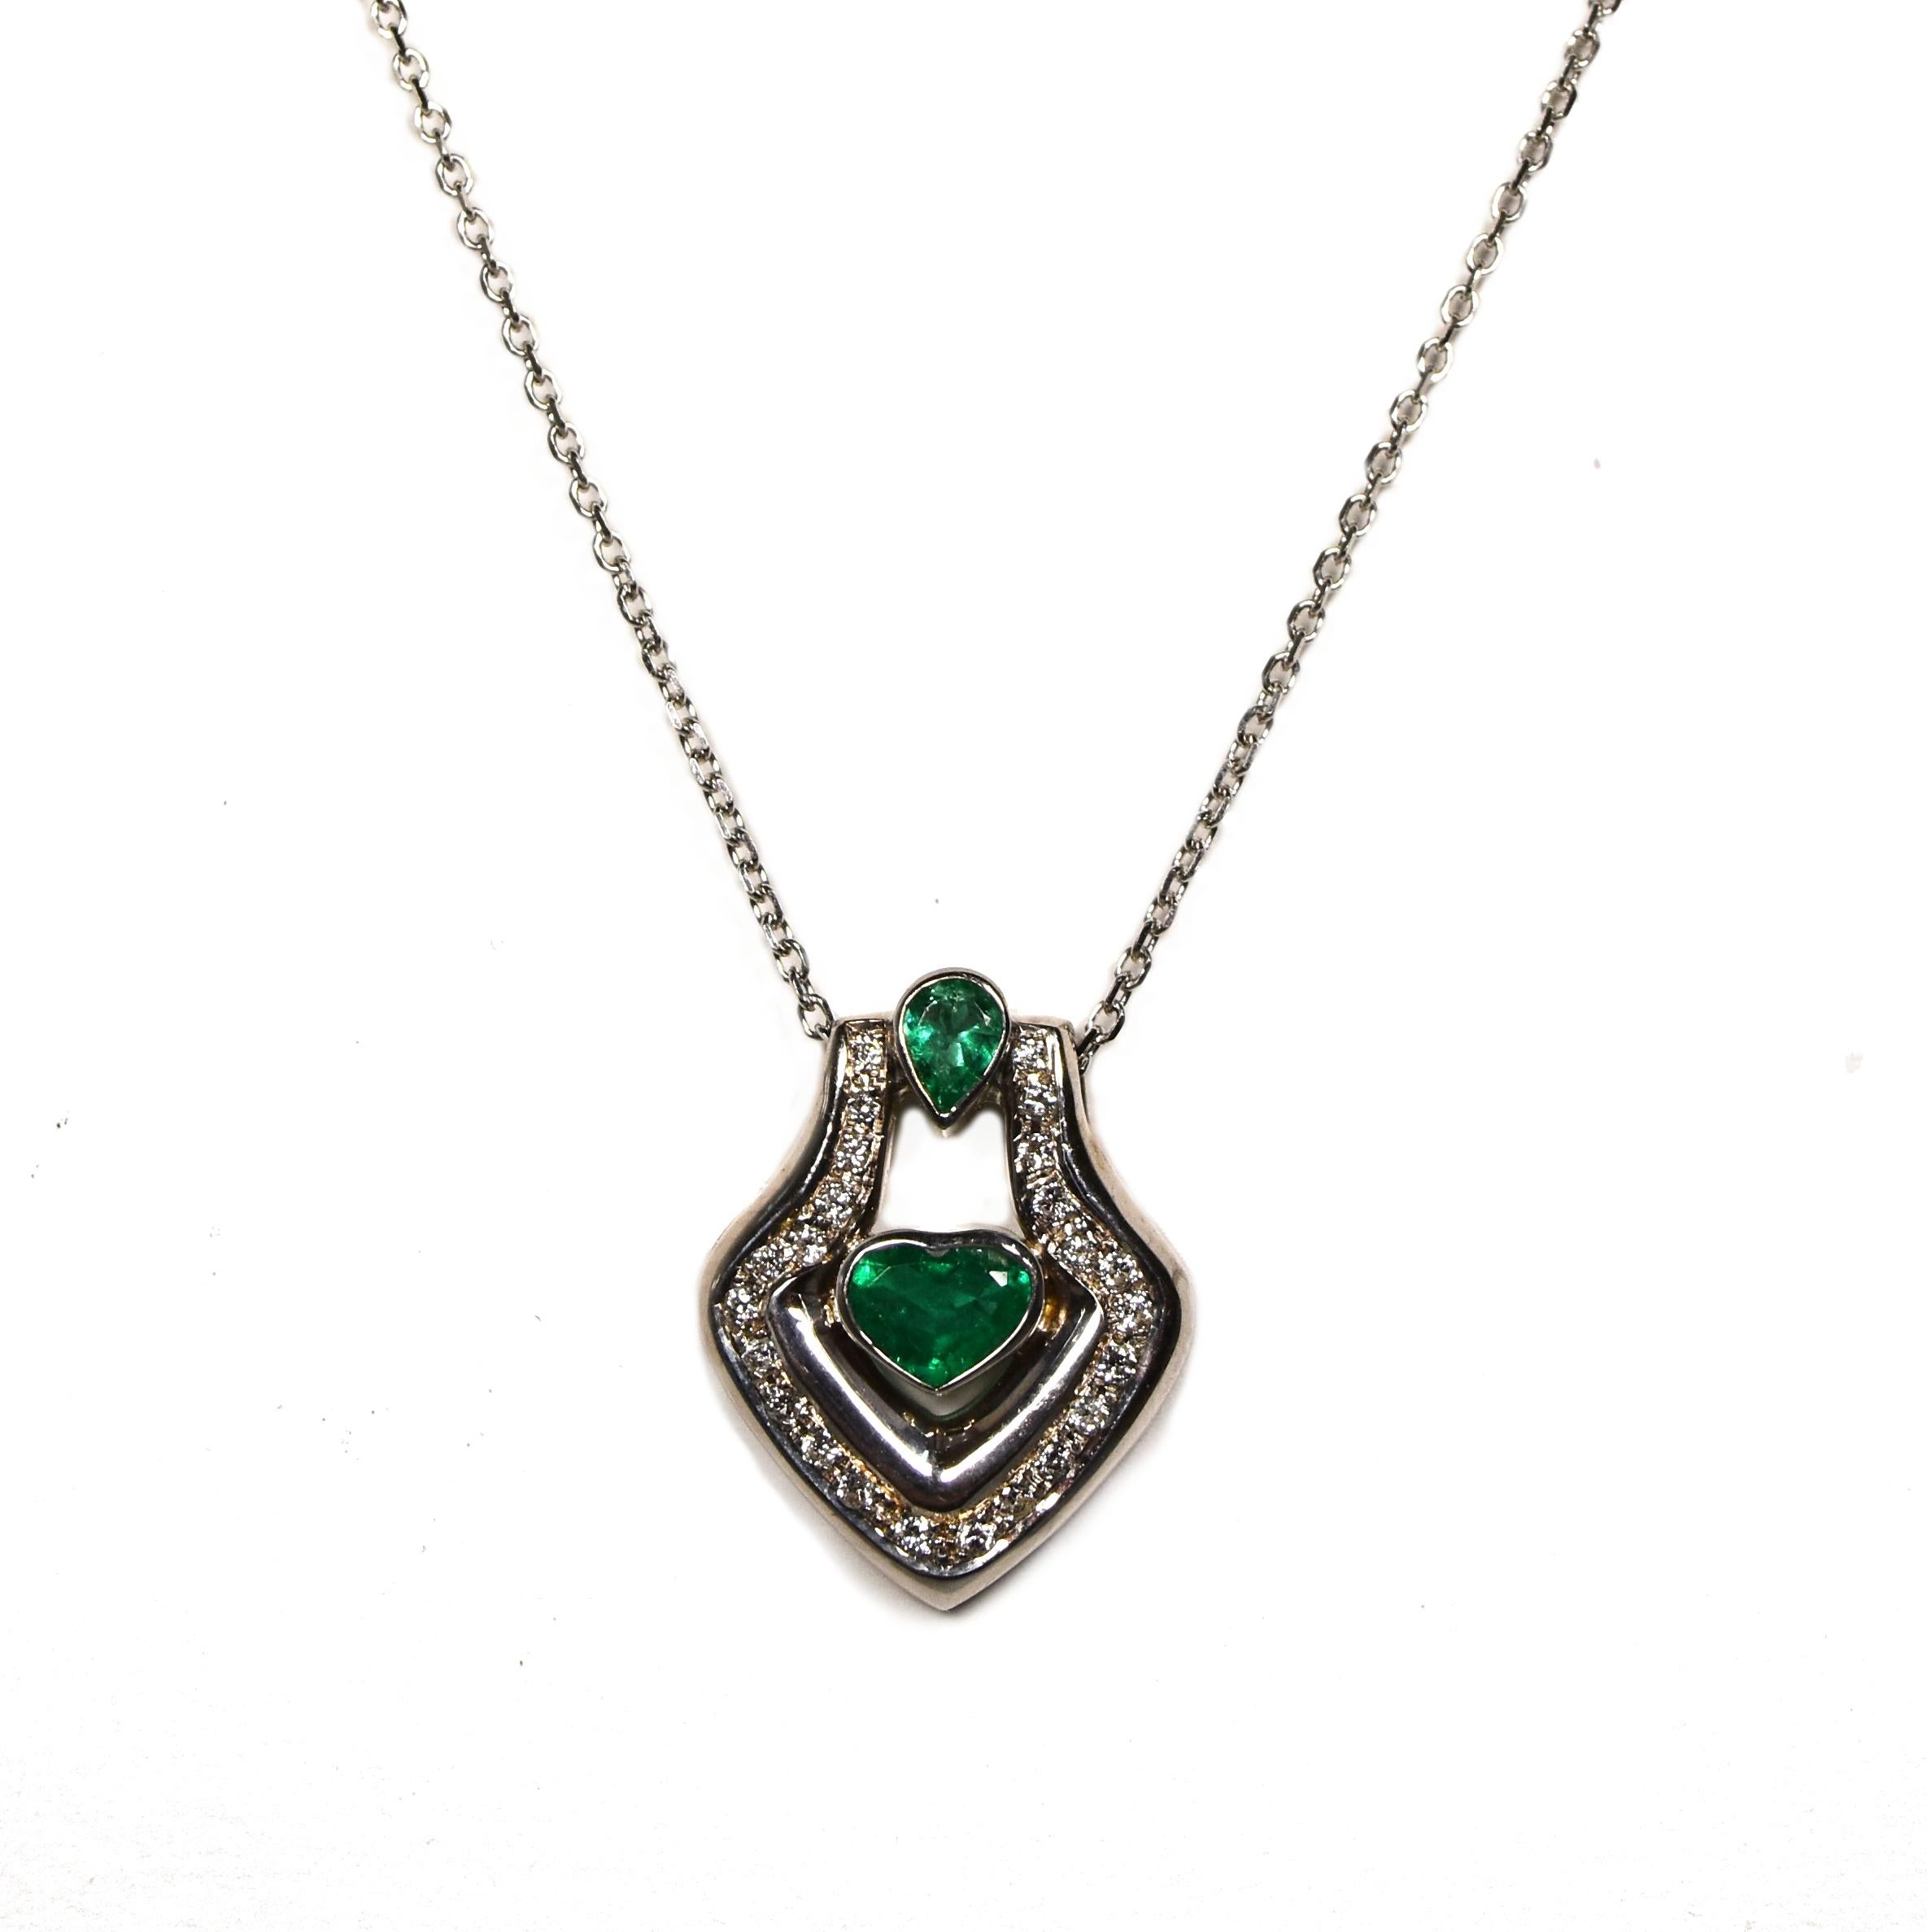 Beautiful pendant set in 18k White Gold which perfectly accents the vibrant hue of the Heart and Pear shaped emeralds in the center of the piece, themselves magnified by a row of pretty and dazzling diamonds. 

A very nice piece with a vintage